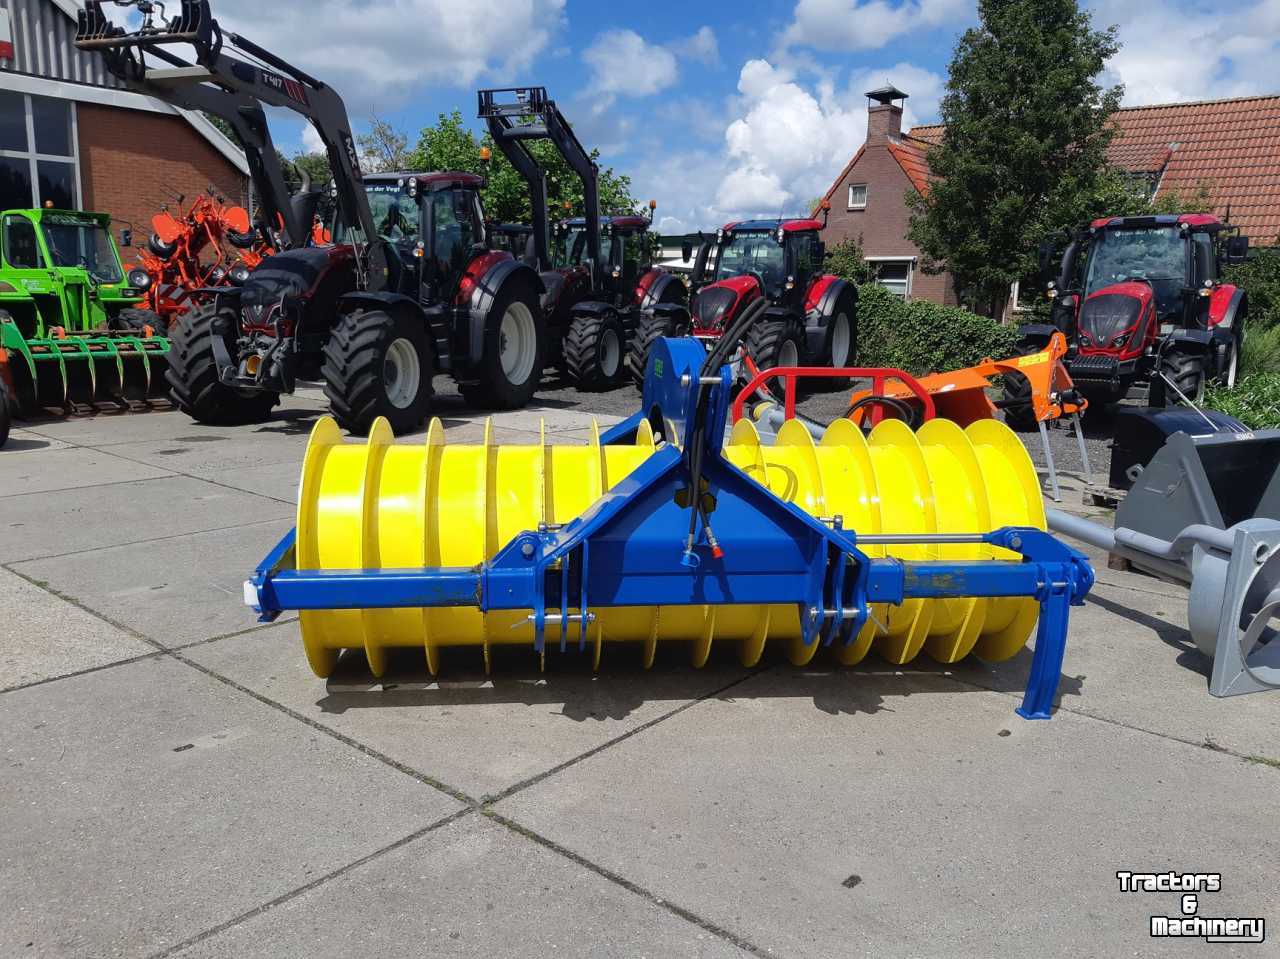 Rouleau packer de silage Ceres Kuilverdichtingswals Demo speciale prijs kuilwals